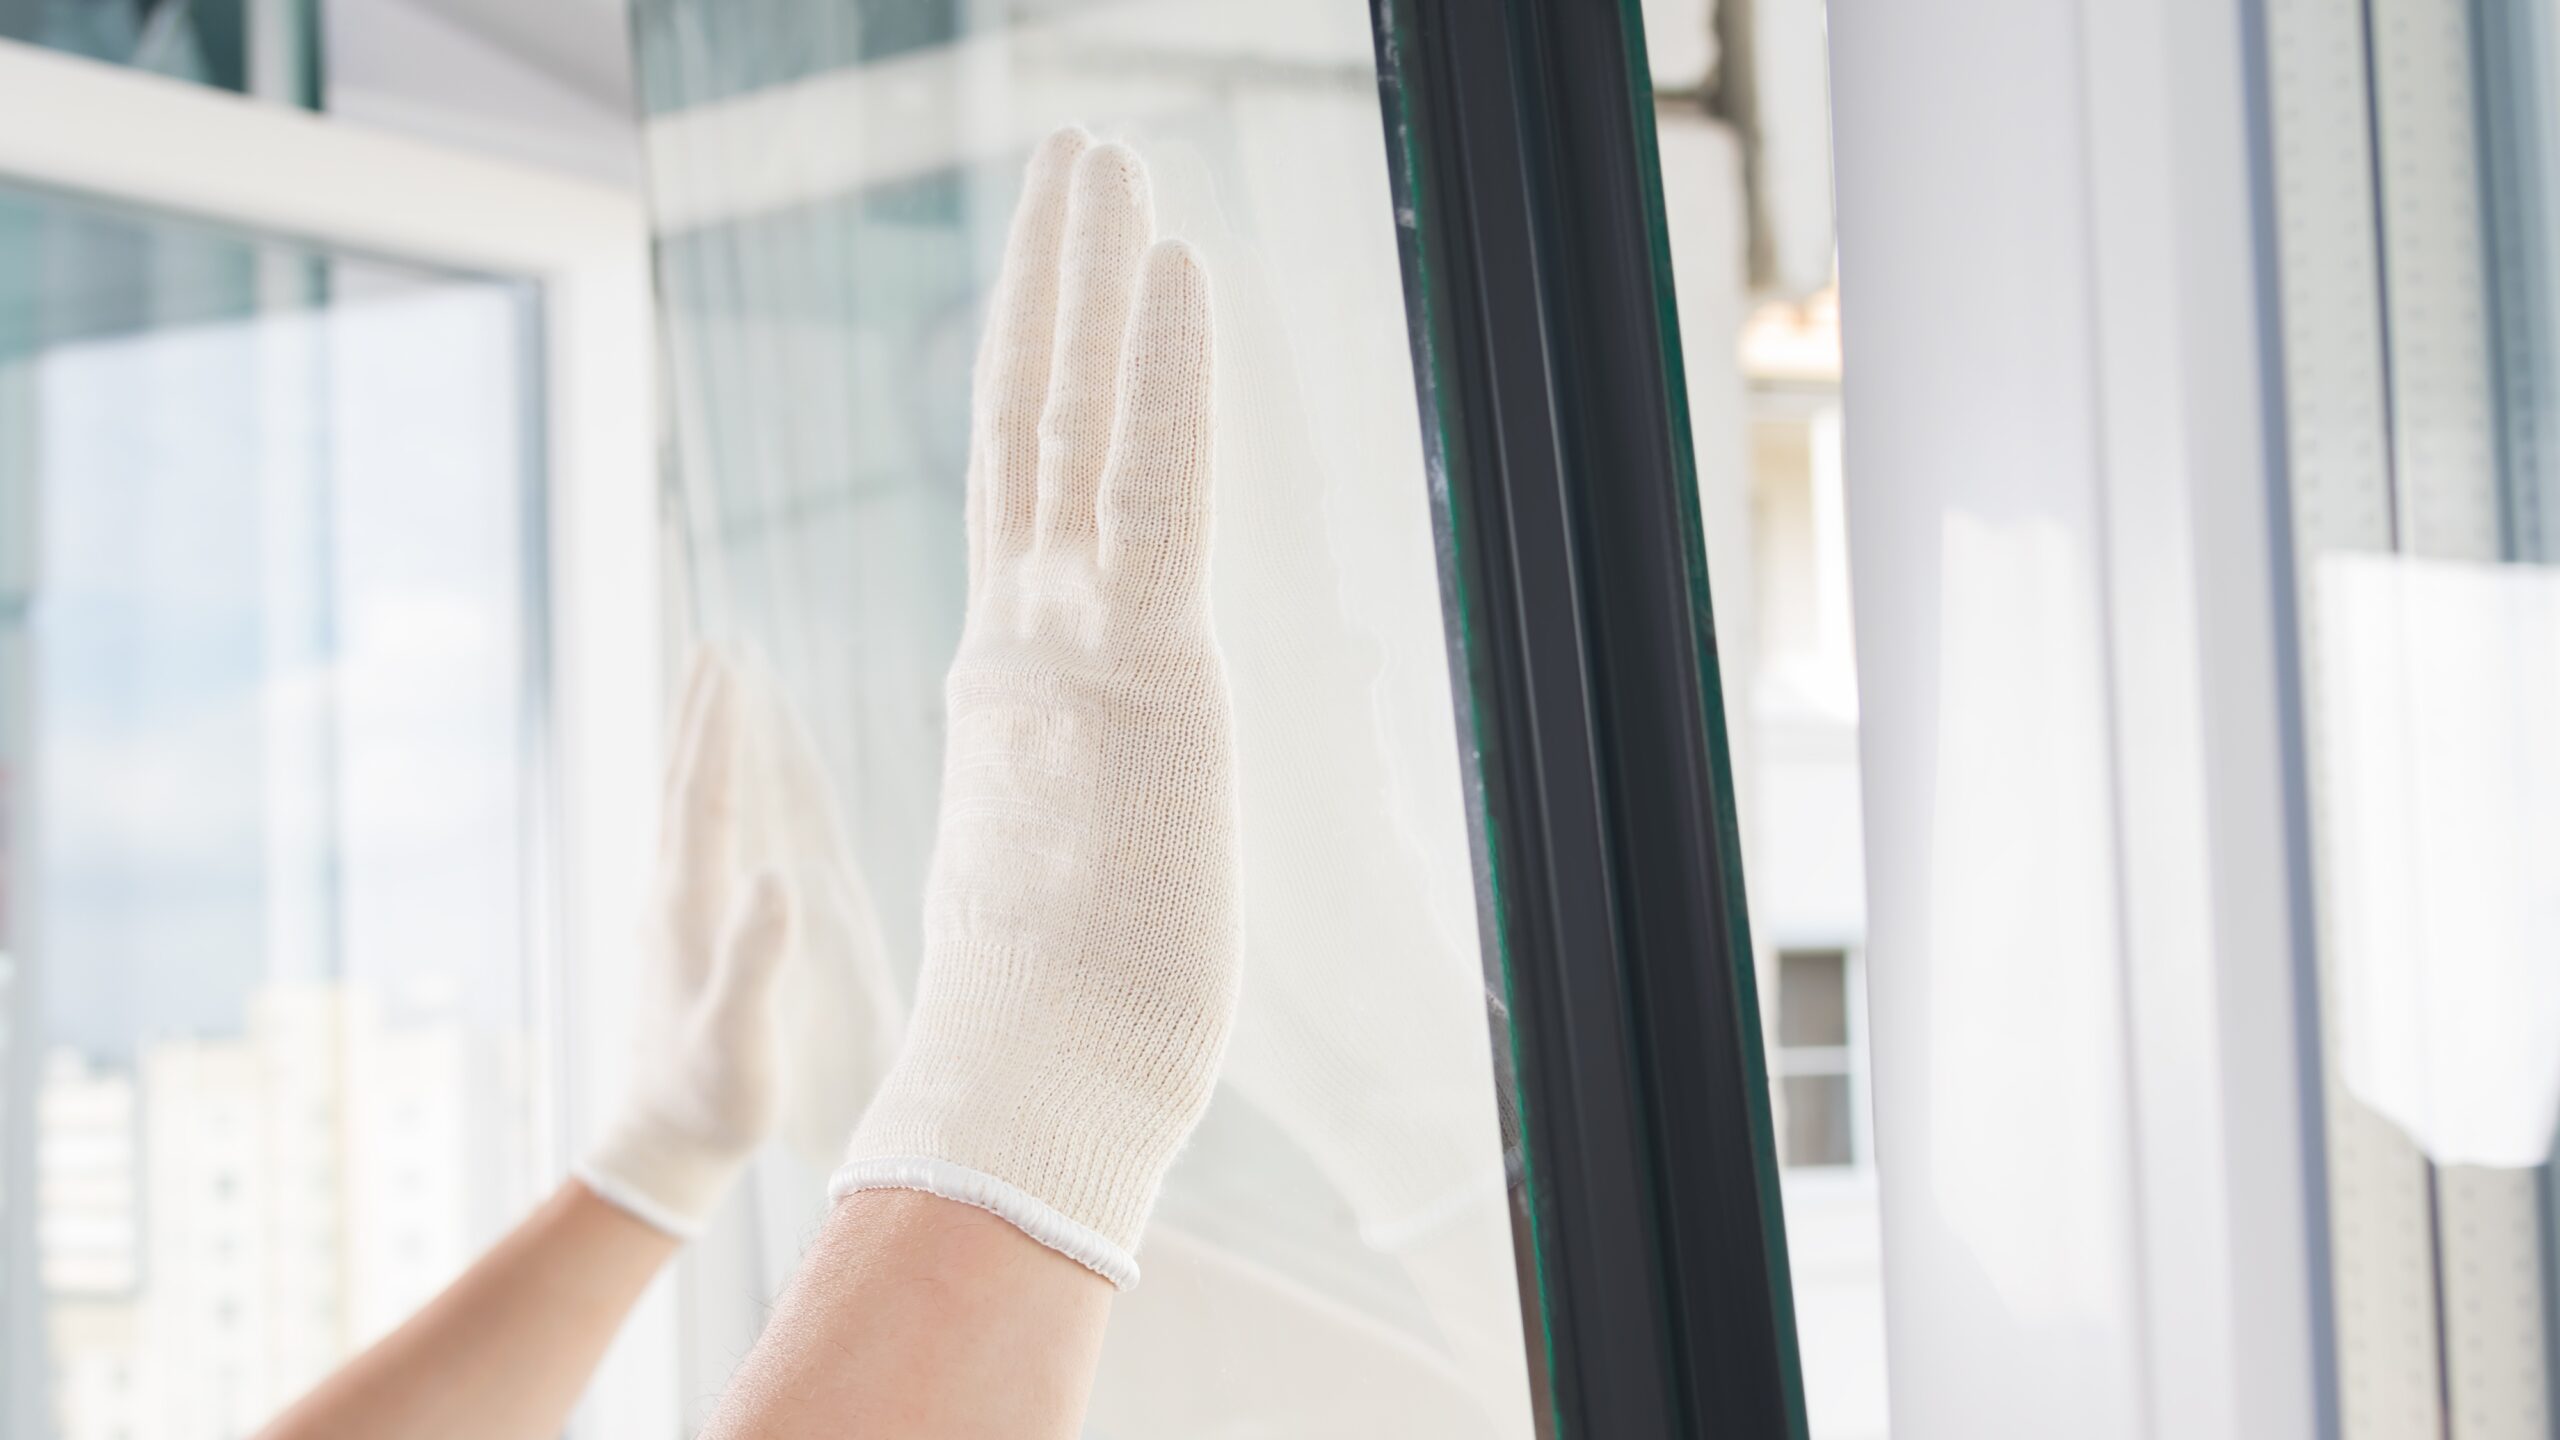 A contractor’s hands are shown installing replacement window glass